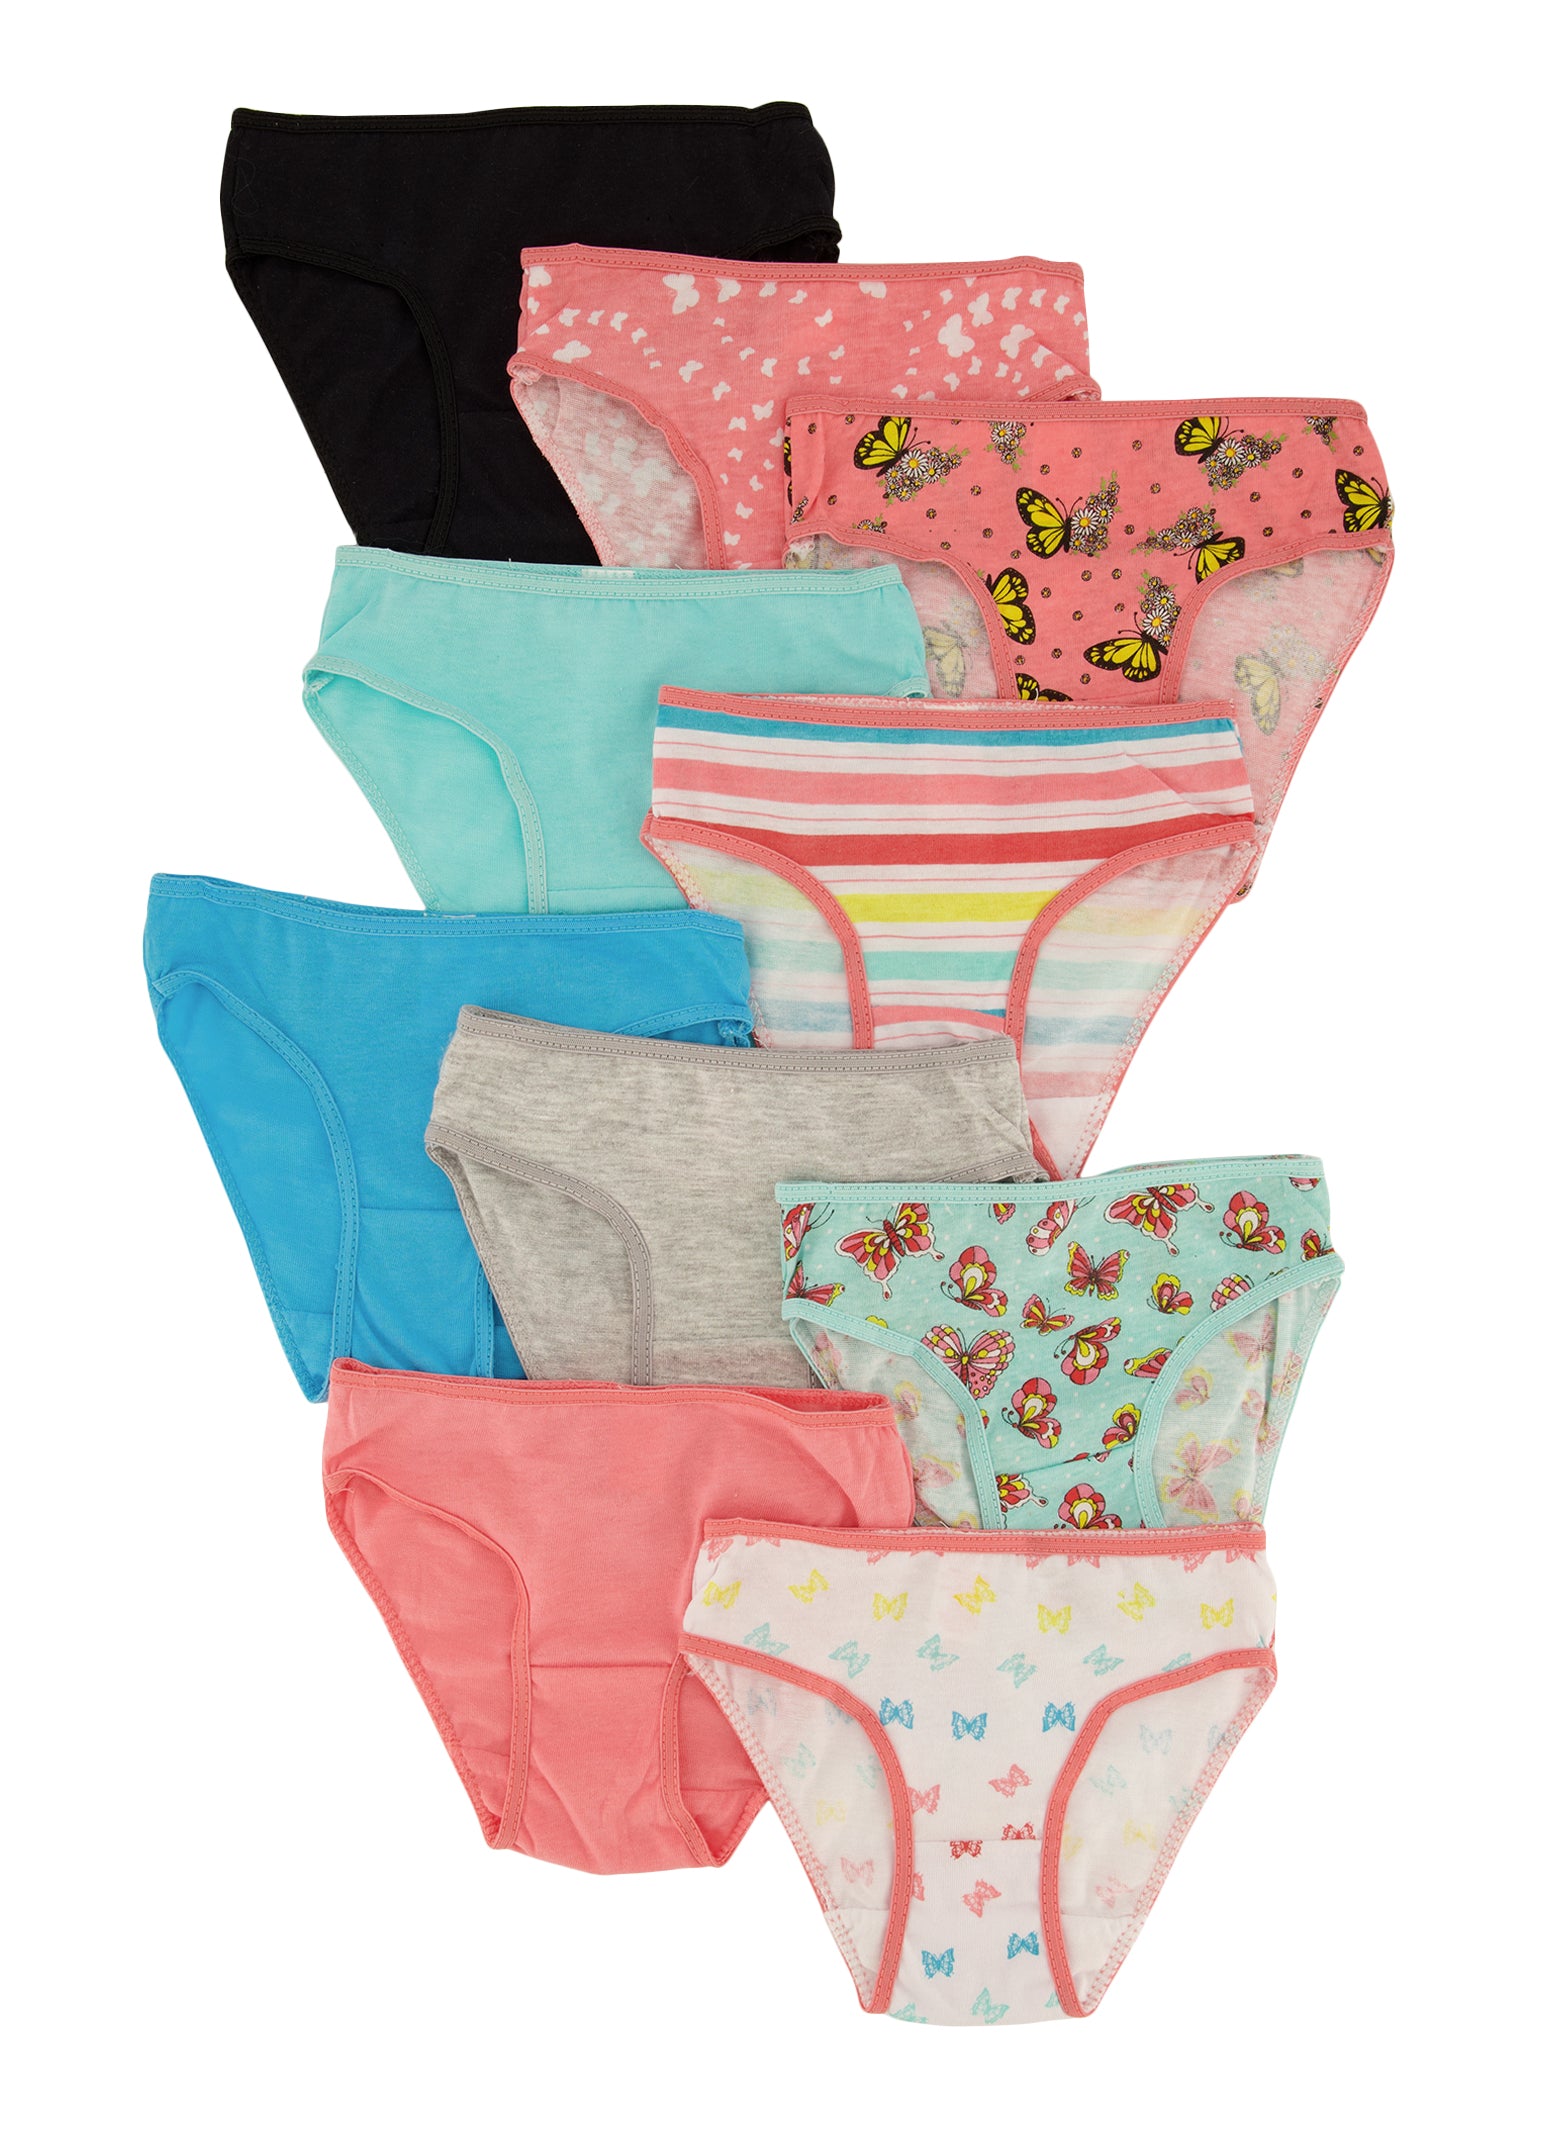 Little Girls 10 Pack Butterfly Print Assorted Panties - Multi Color